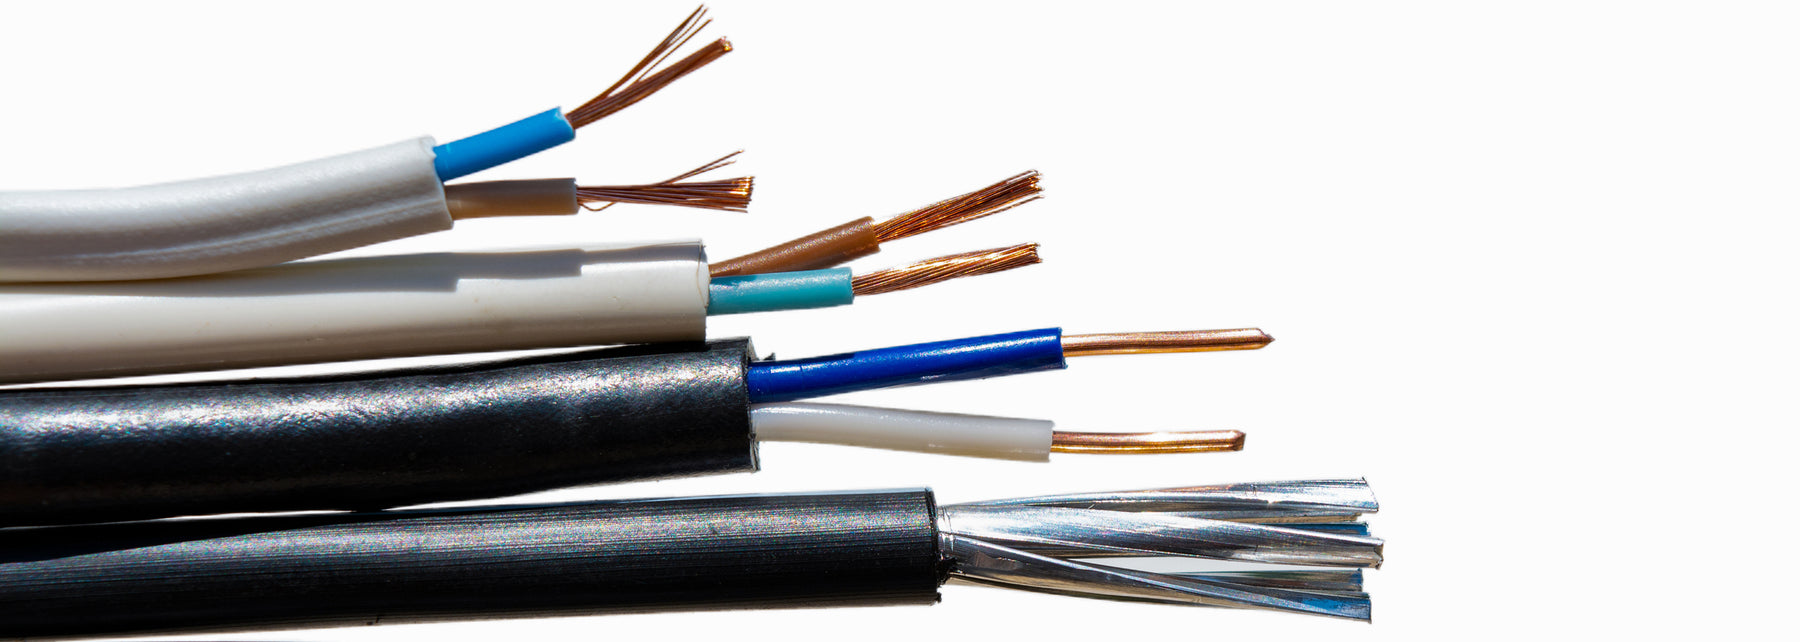 Learning The Difference Between Riser, Plenum, and General Application Cable Jackets